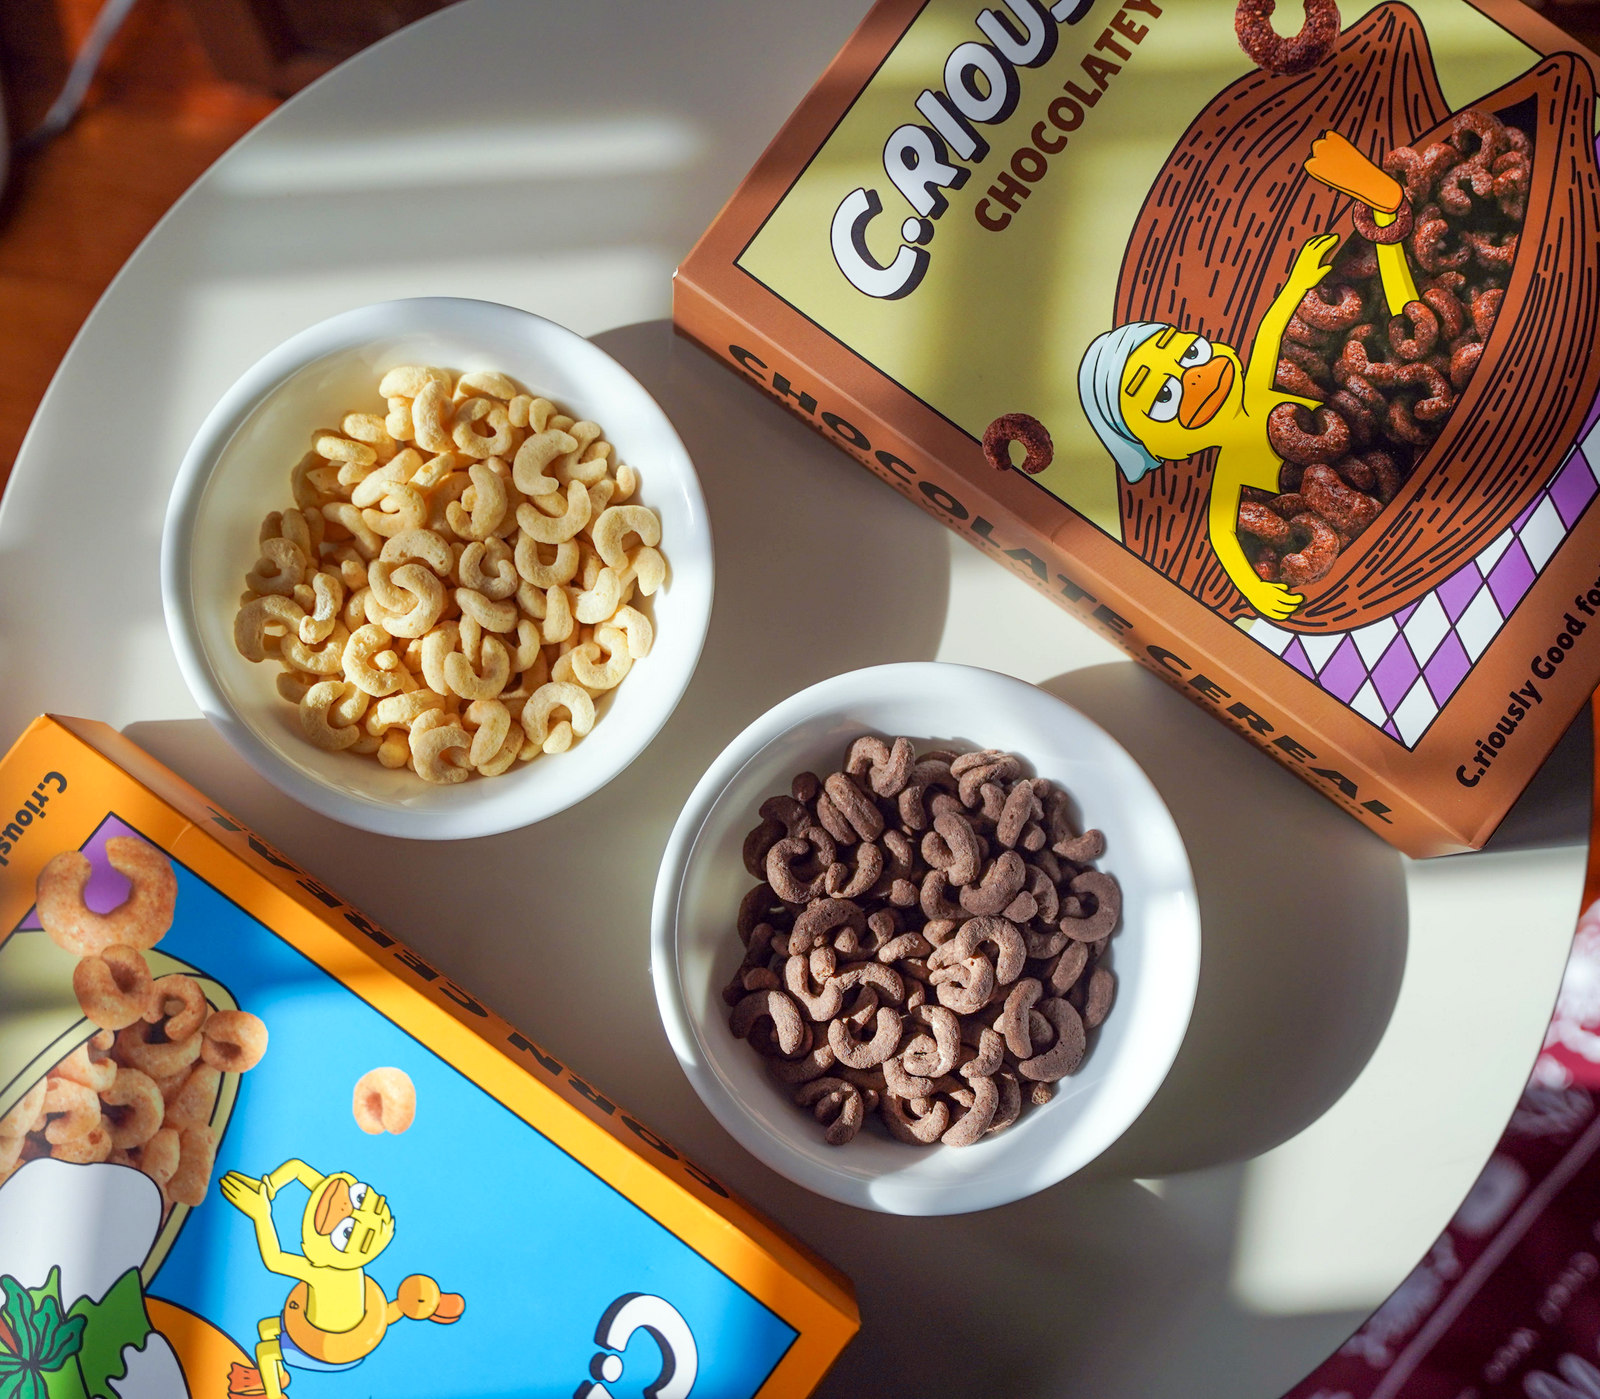 C.riously: This playful new cereal is crafted for flavour, fitness & fun